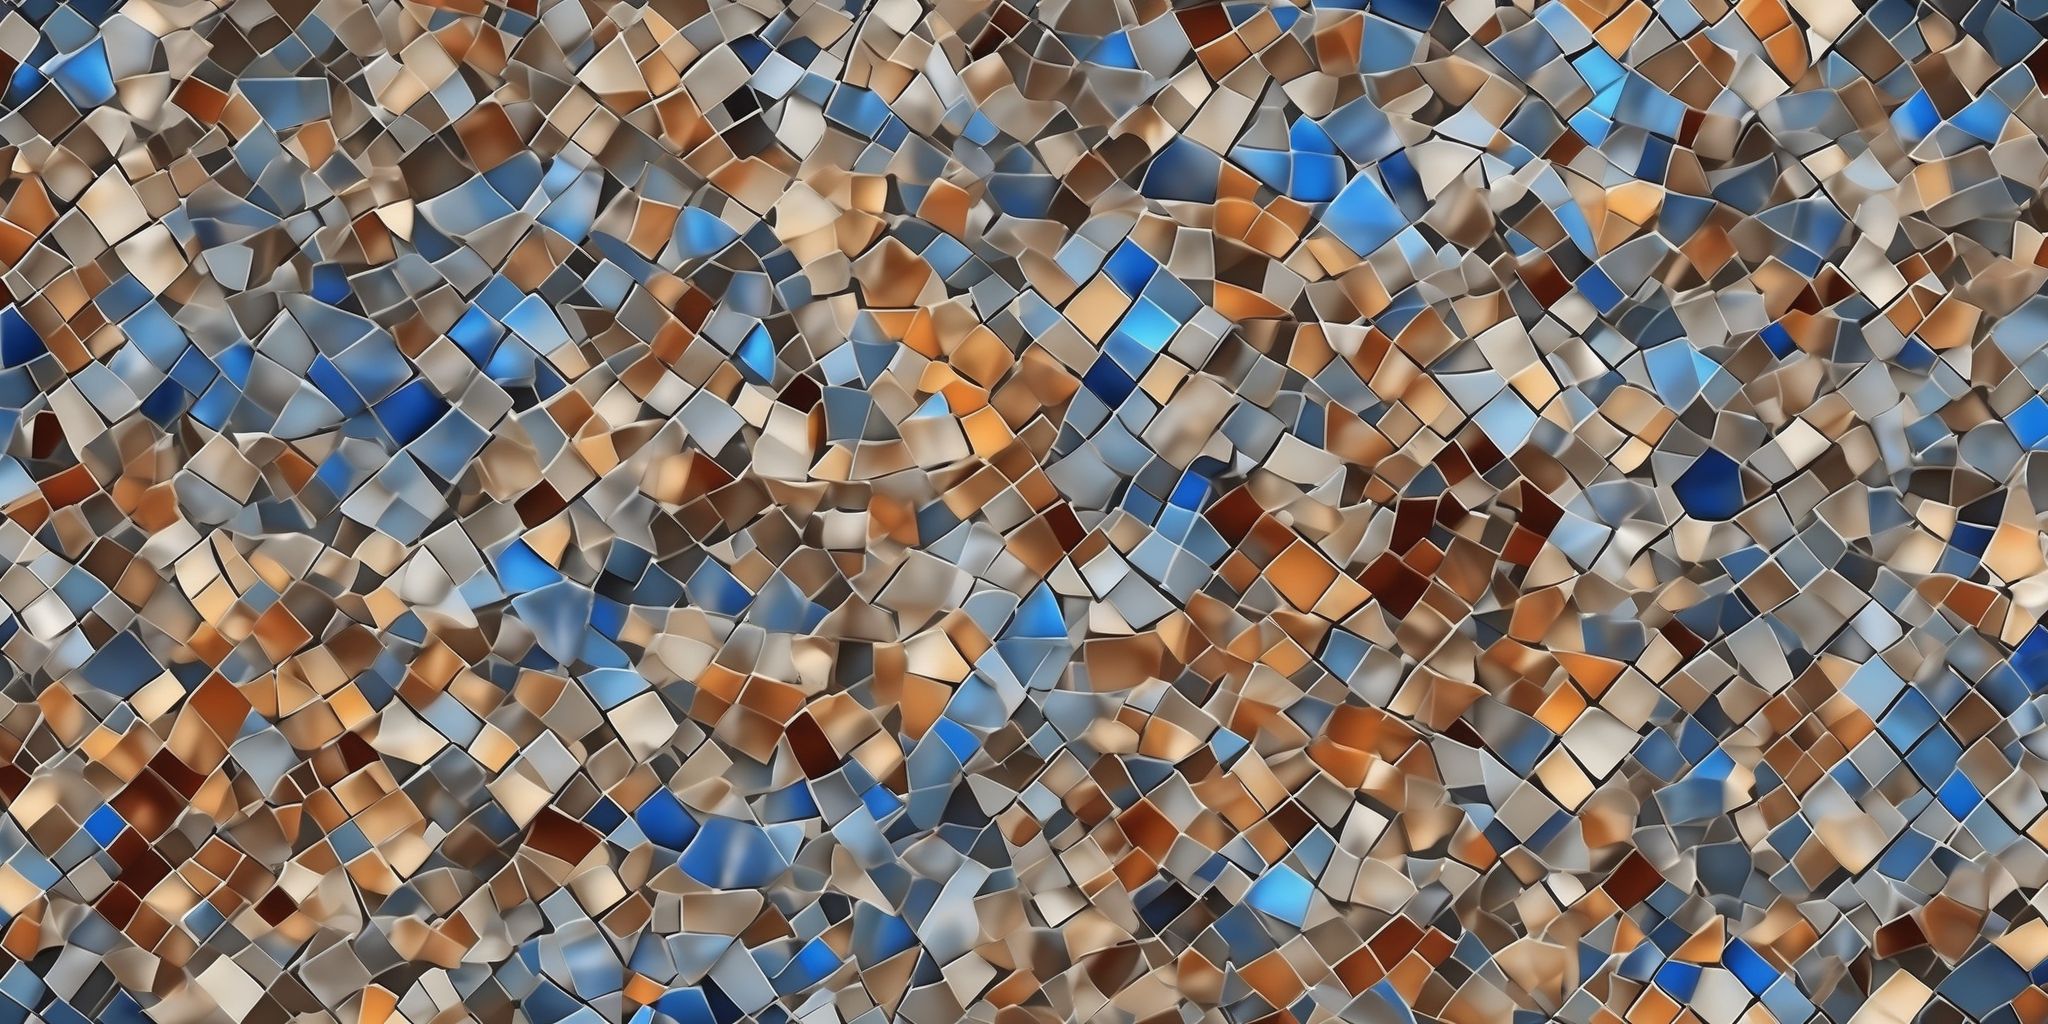 Mosaic  in realistic, photographic style